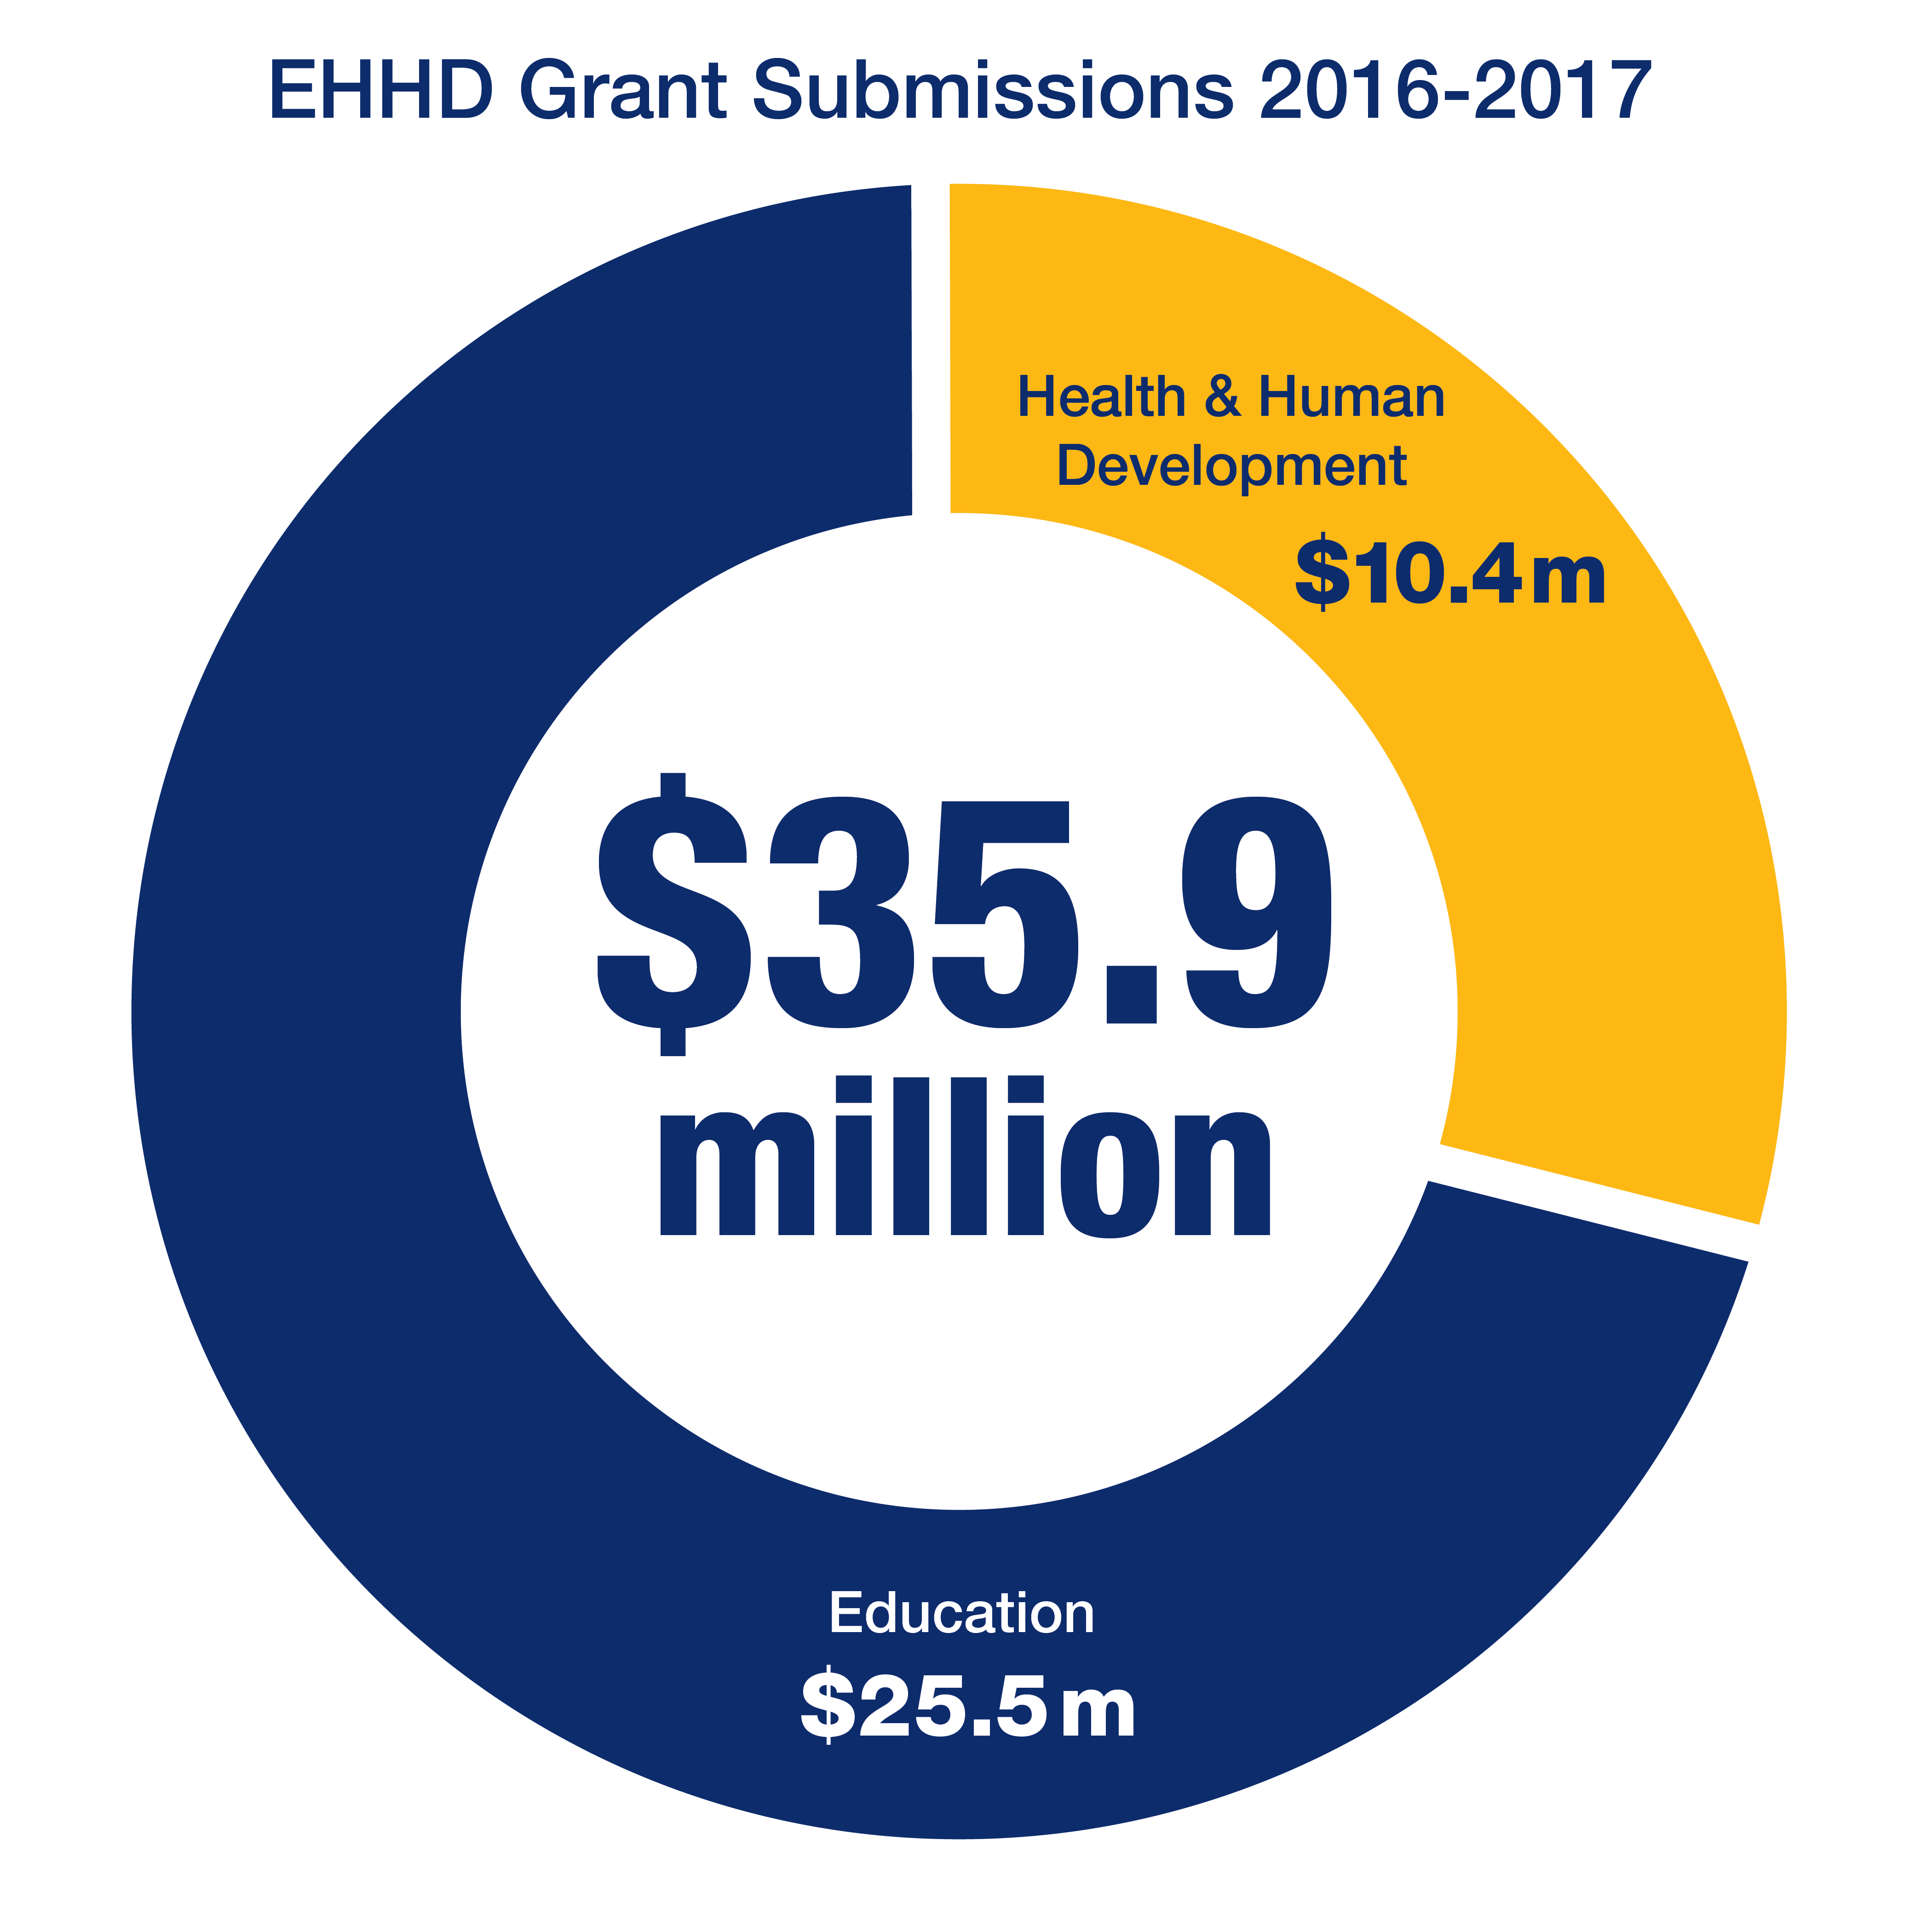 EHHD Grant Submissions 2016–2017 $10.4 million to Health and Human Development and $25.5 million to Education for a total of $35.9 million